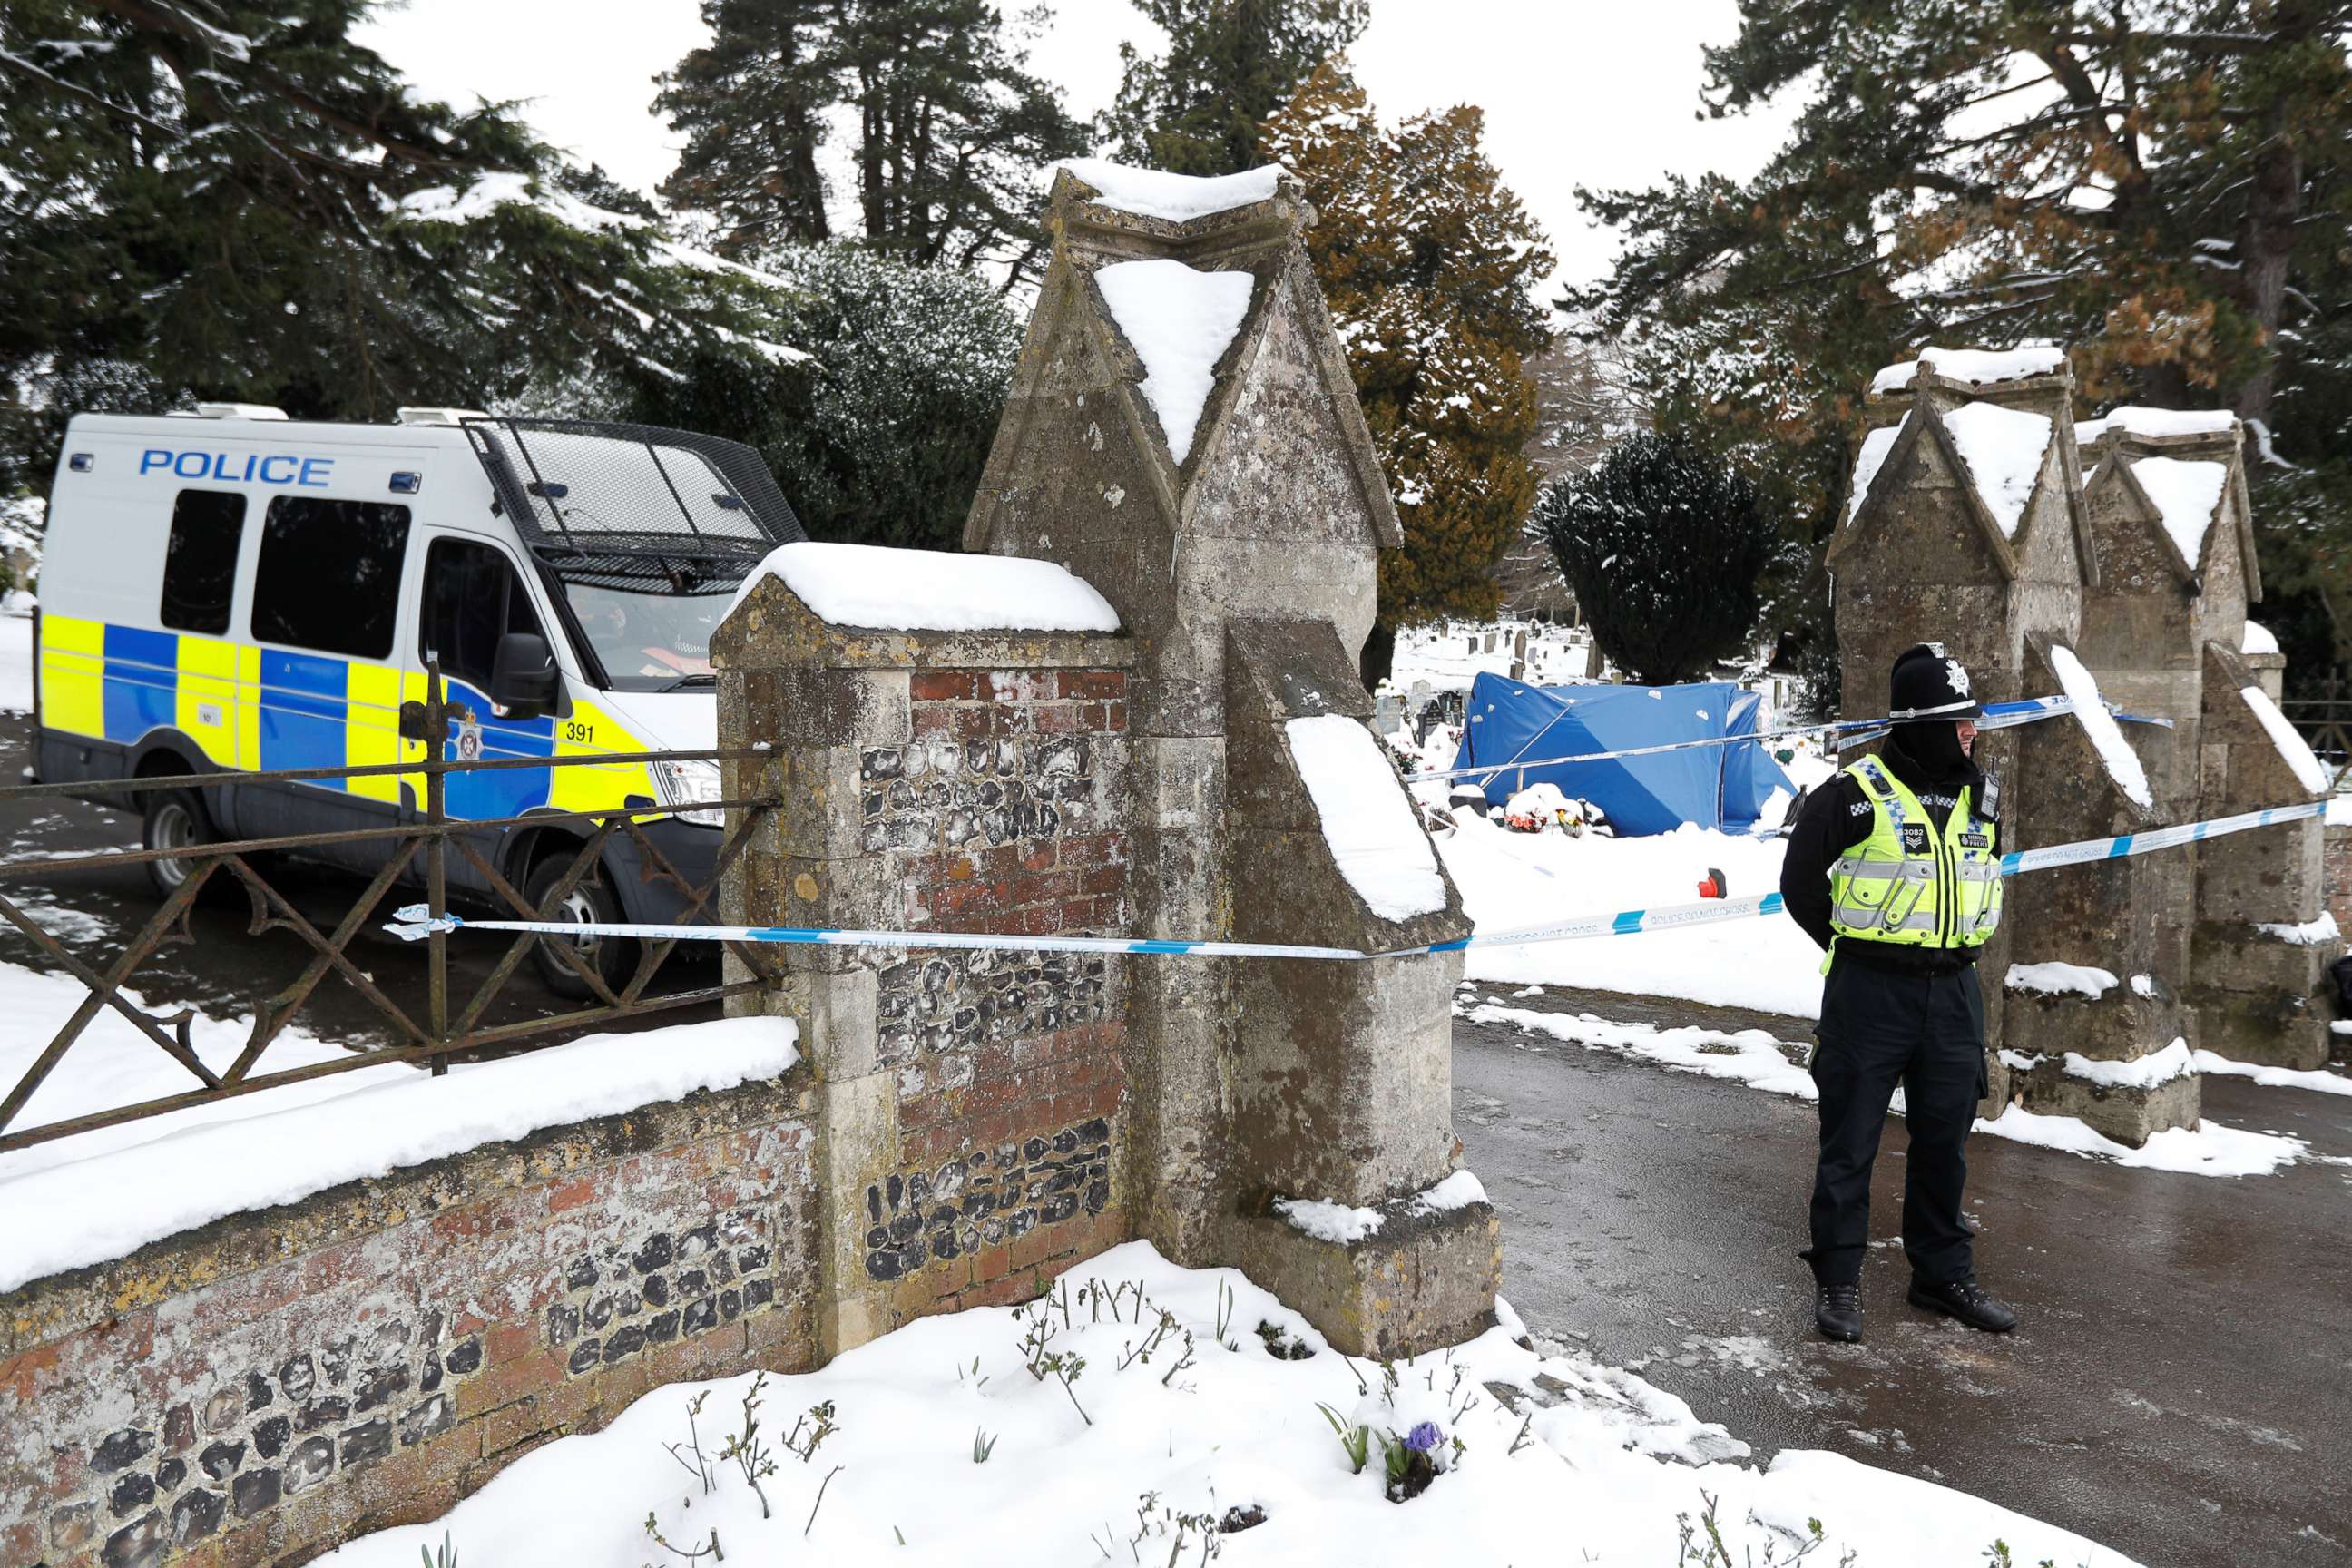 PHOTO: A police officer stands outside the London Road cemetery where the grave of Alexander Skripal, son of former Russian intelligence officer Sergei Skripal, is seen covered with a tent, in Salisbury, Britain, March 19, 2018.